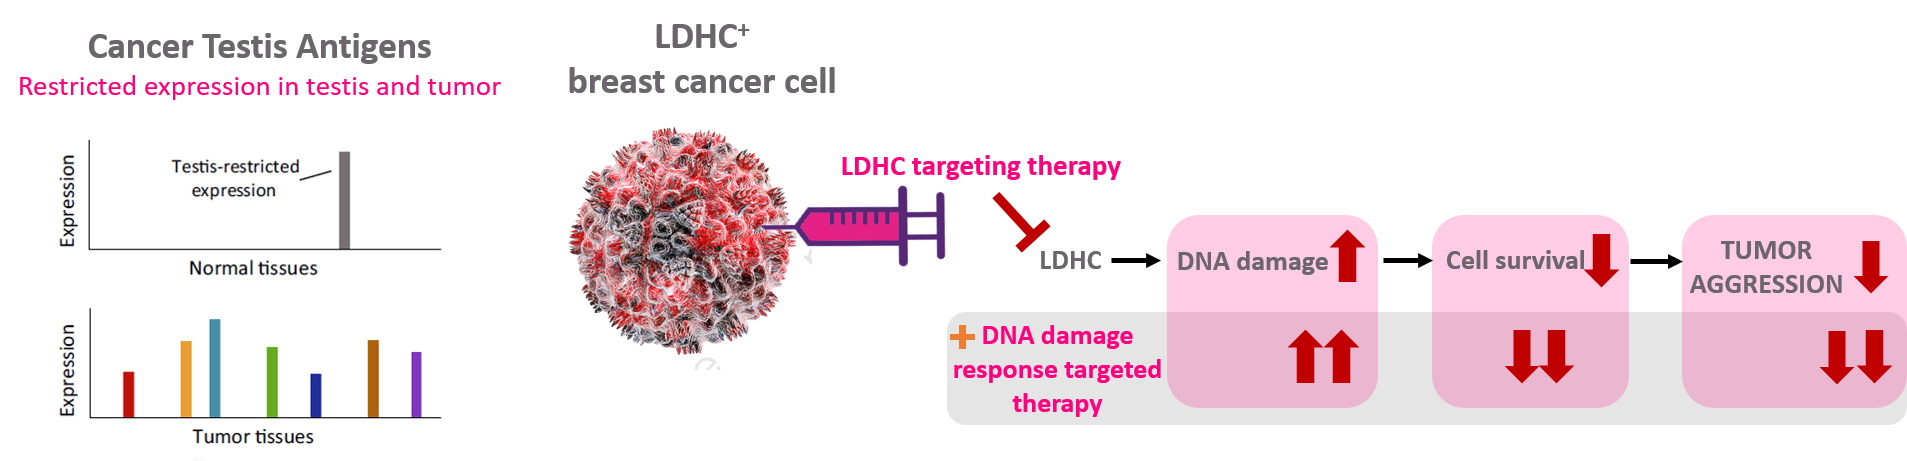 Figure 1. Targeting the cancer-testis antigen LDHC in breast cancer to reduce tumor cell survival and improve sensitivity to DNA damage response targeted therapy.  